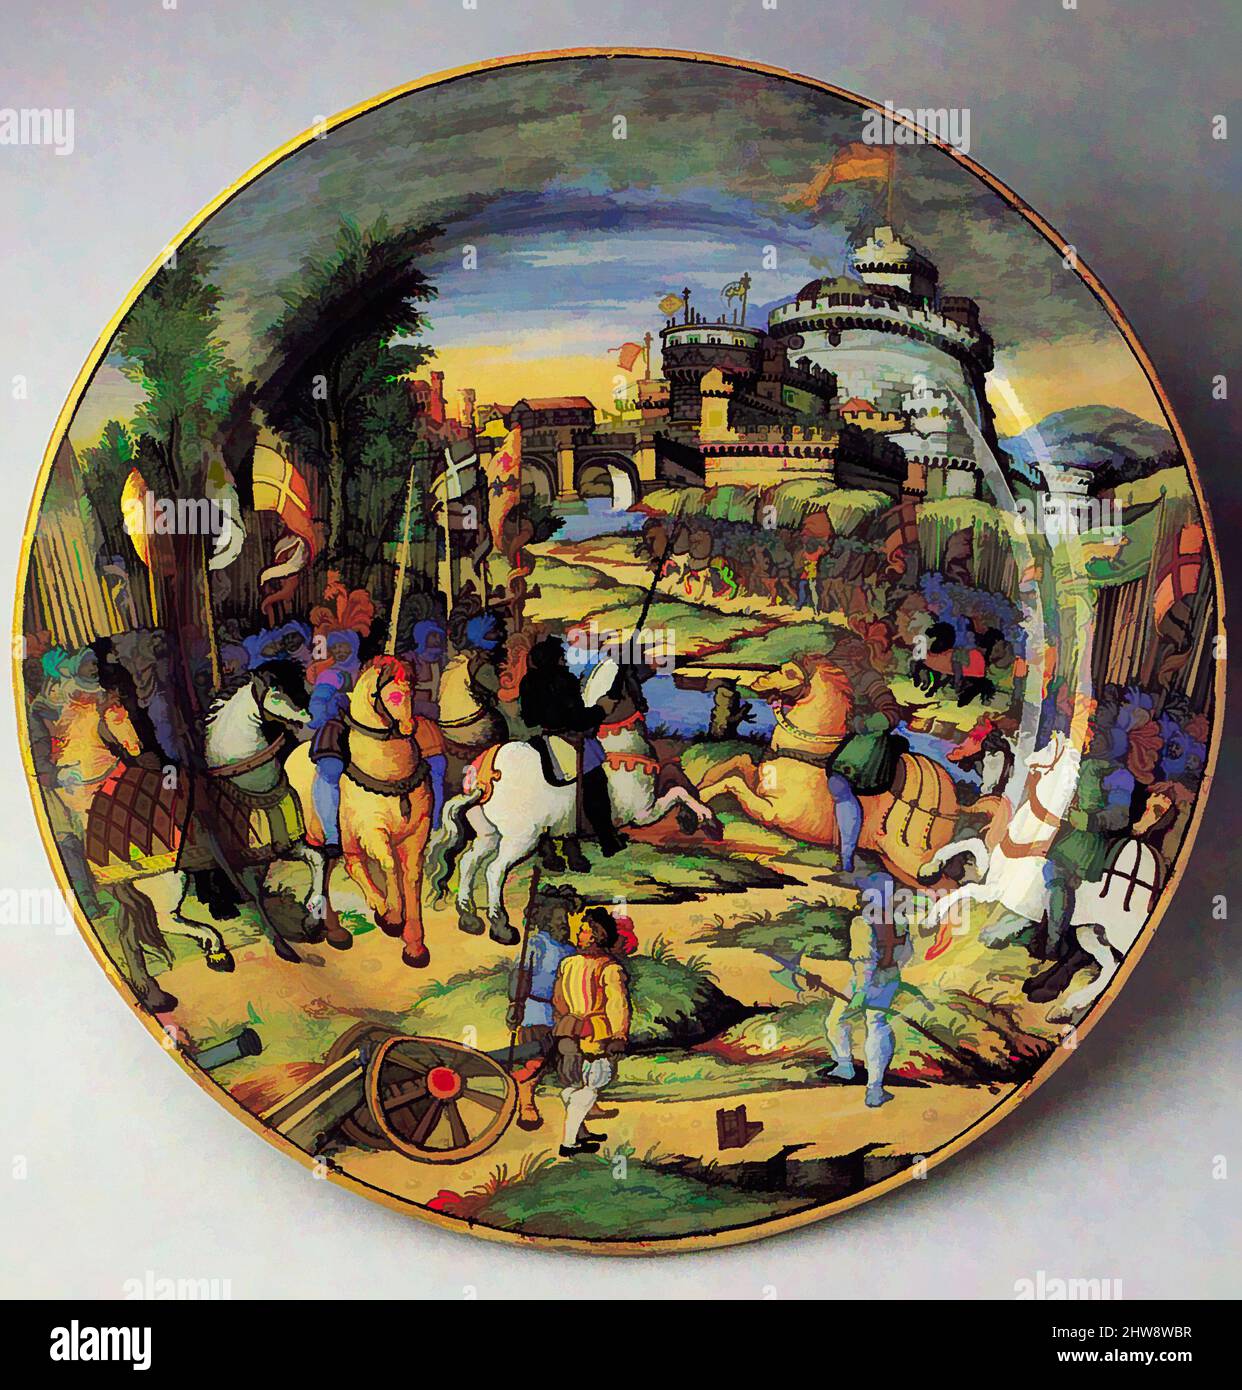 Art inspired by Large plate (grande piatto): An episode from the Sack of Rome, 1527: the assault on the Borgo (?), ca. 1540, Italian, Urbino, Maiolica (tin-glazed earthenware), Diameter: 17 3/8 in. (44.2 cm), Ceramics-Pottery, workshop of Guido Durantino (Italian, Urbino, active 1516–, Classic works modernized by Artotop with a splash of modernity. Shapes, color and value, eye-catching visual impact on art. Emotions through freedom of artworks in a contemporary way. A timeless message pursuing a wildly creative new direction. Artists turning to the digital medium and creating the Artotop NFT Stock Photo